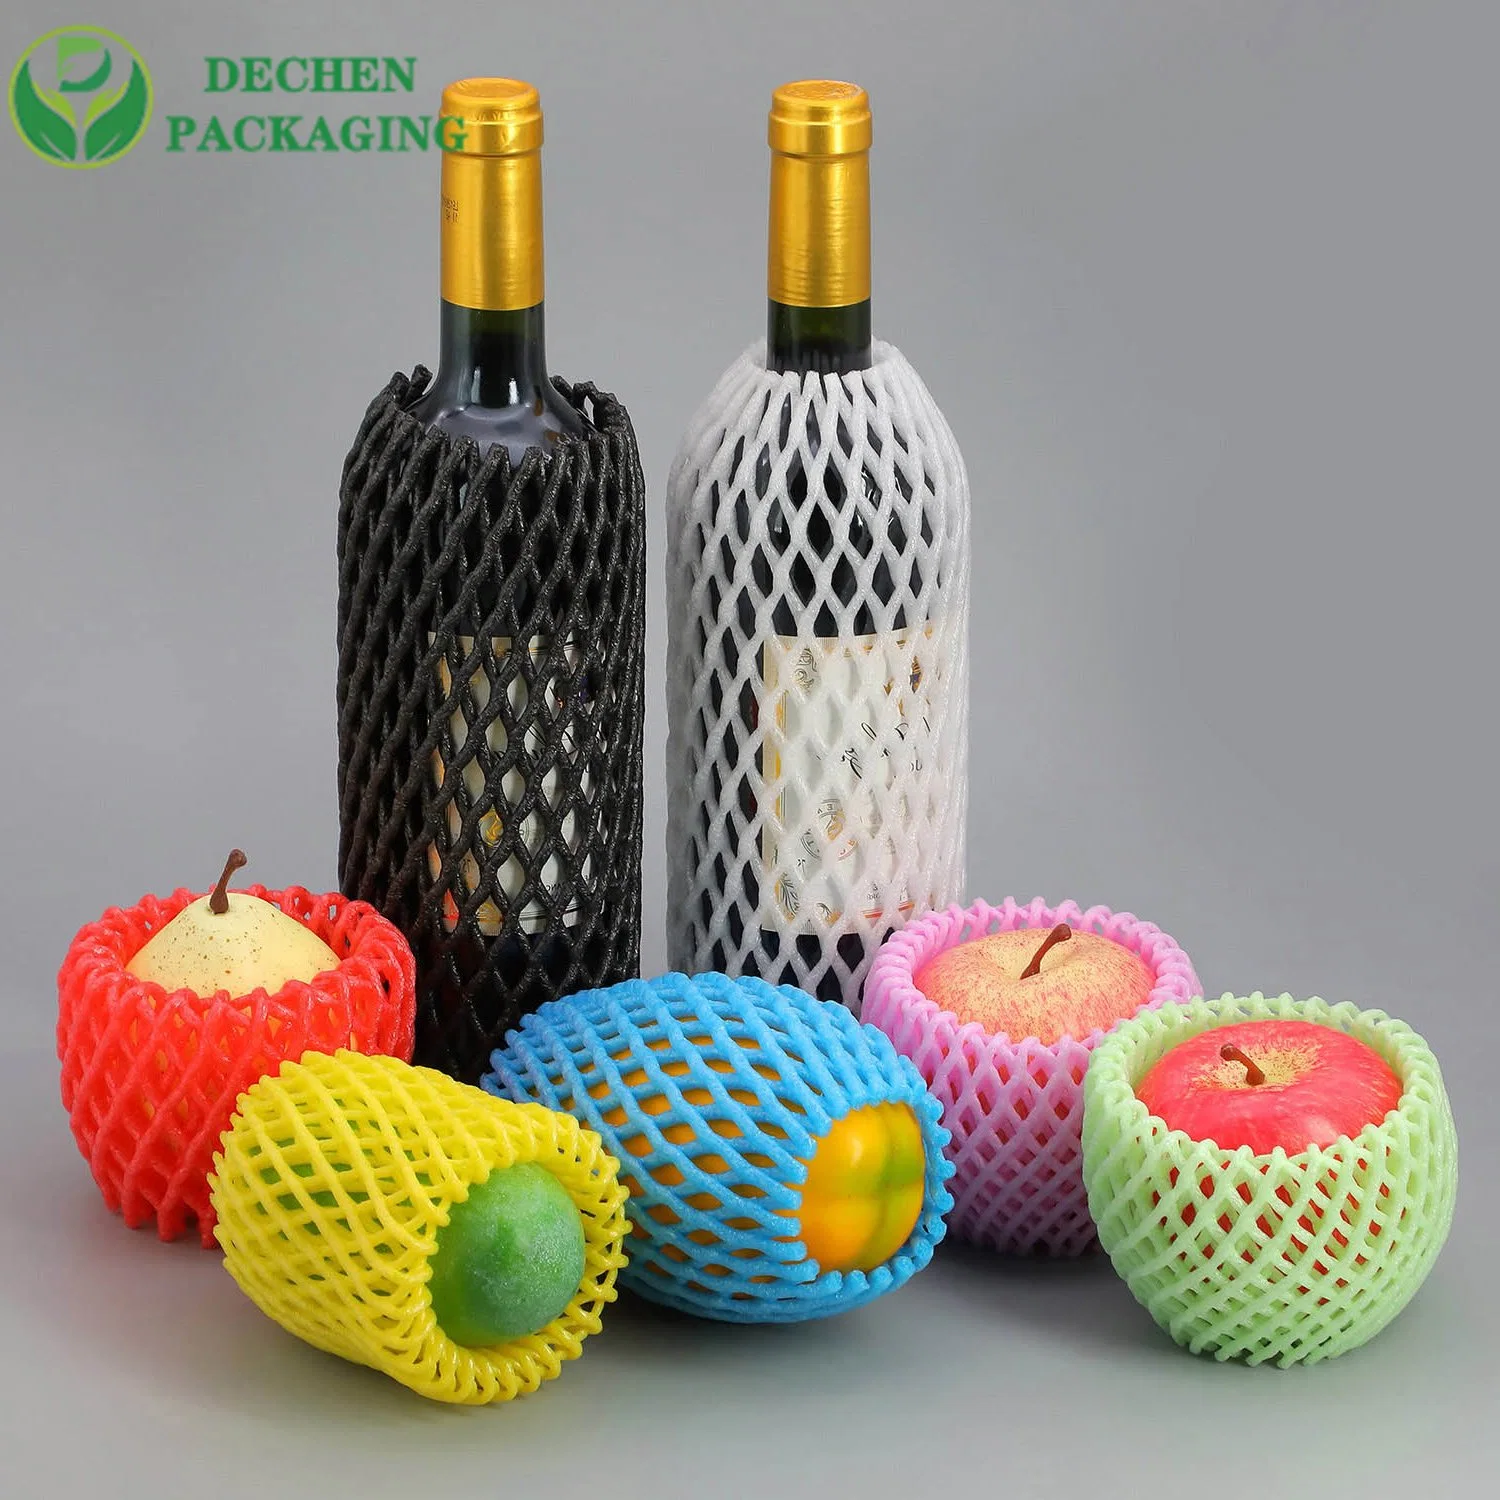 EPE Foam Packaging Protective Sleeves for Fruit Wine Bottle Plastic Protection